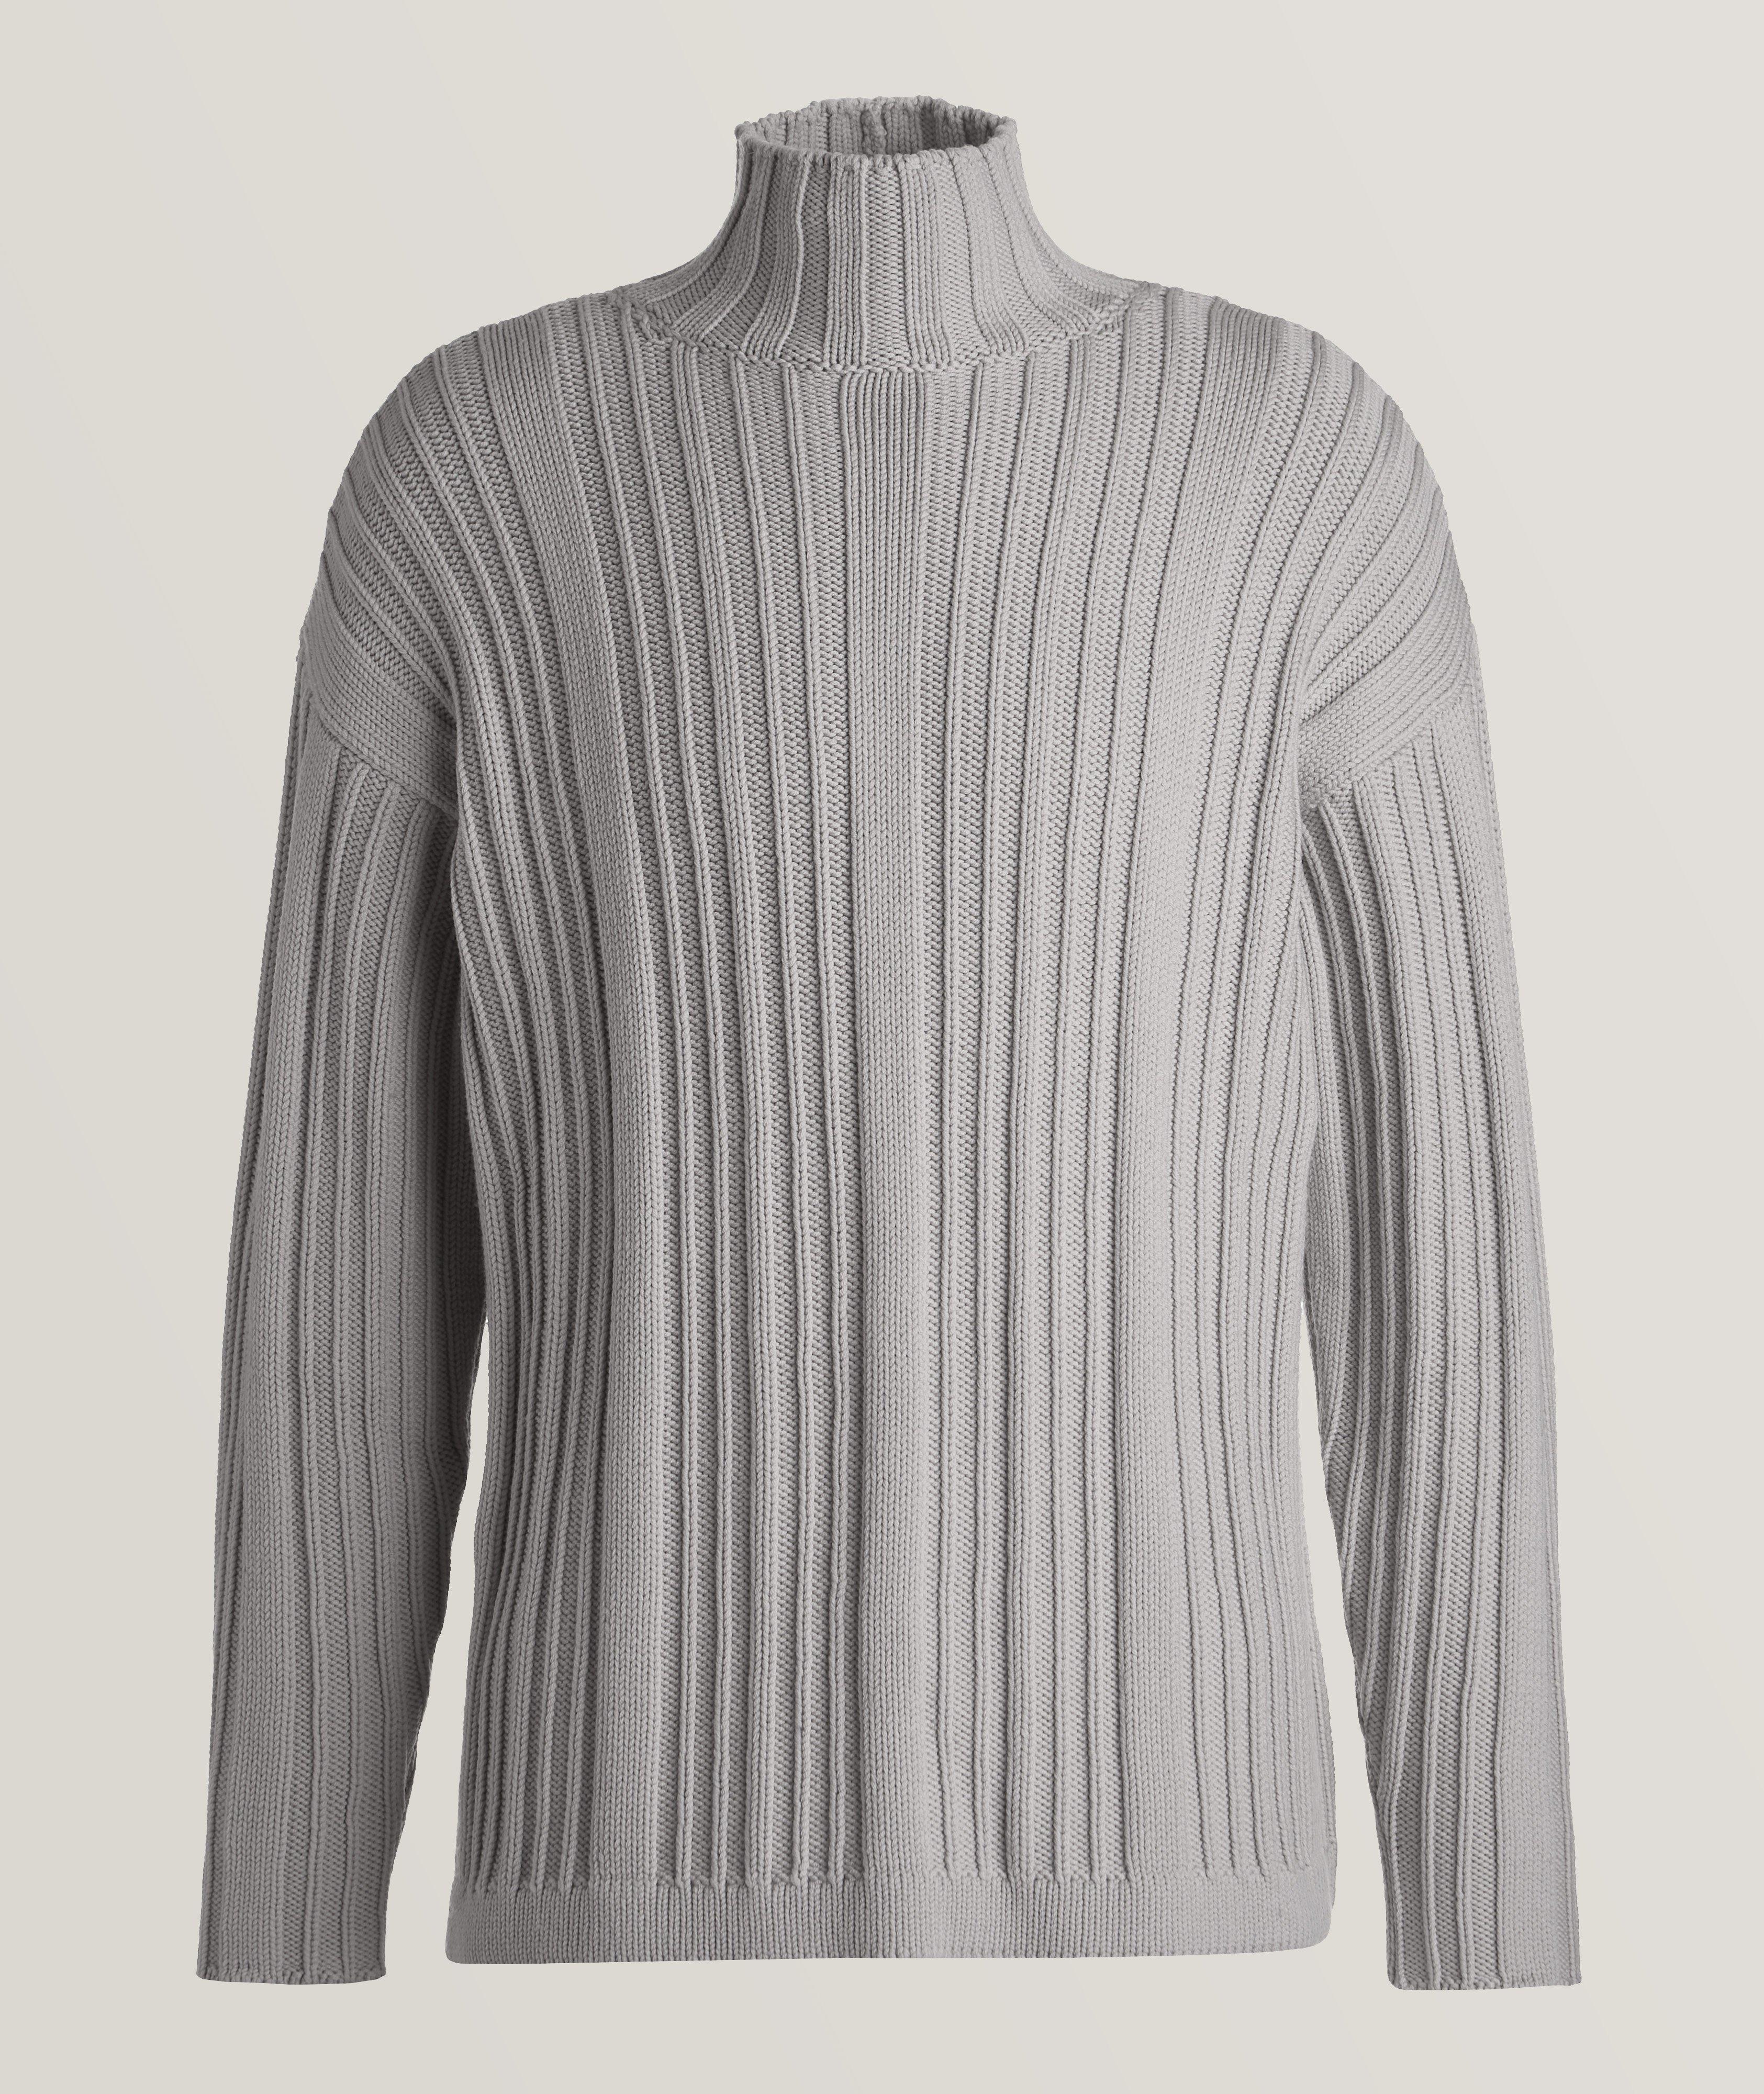 Virgin Wool Thich Rib-Knitted Turtleneck Sweater image 0